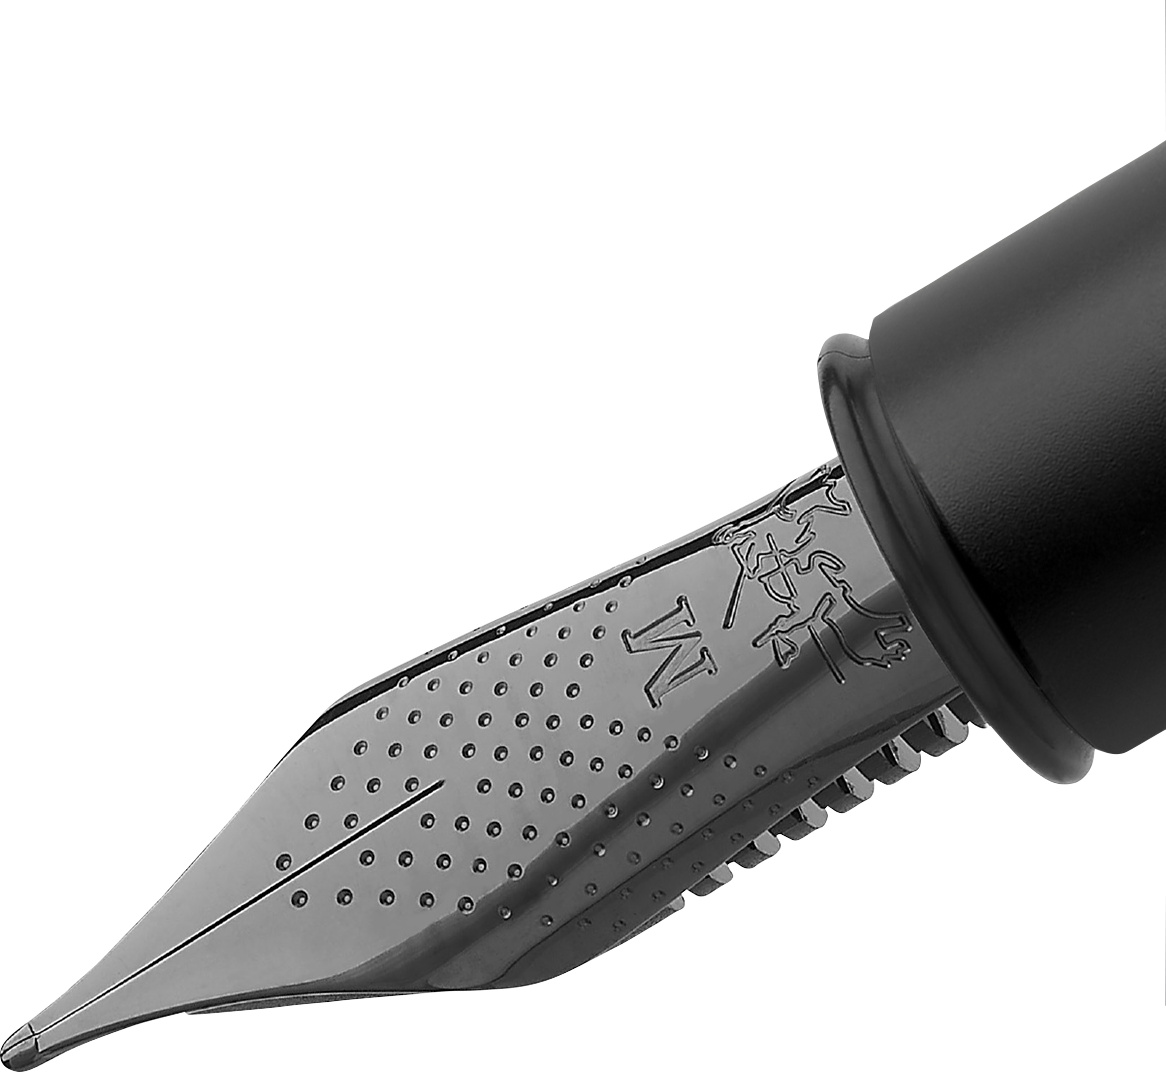 Faber-Castell_Ambition All Black fountain pen, EF_EUR 100,00 (2)